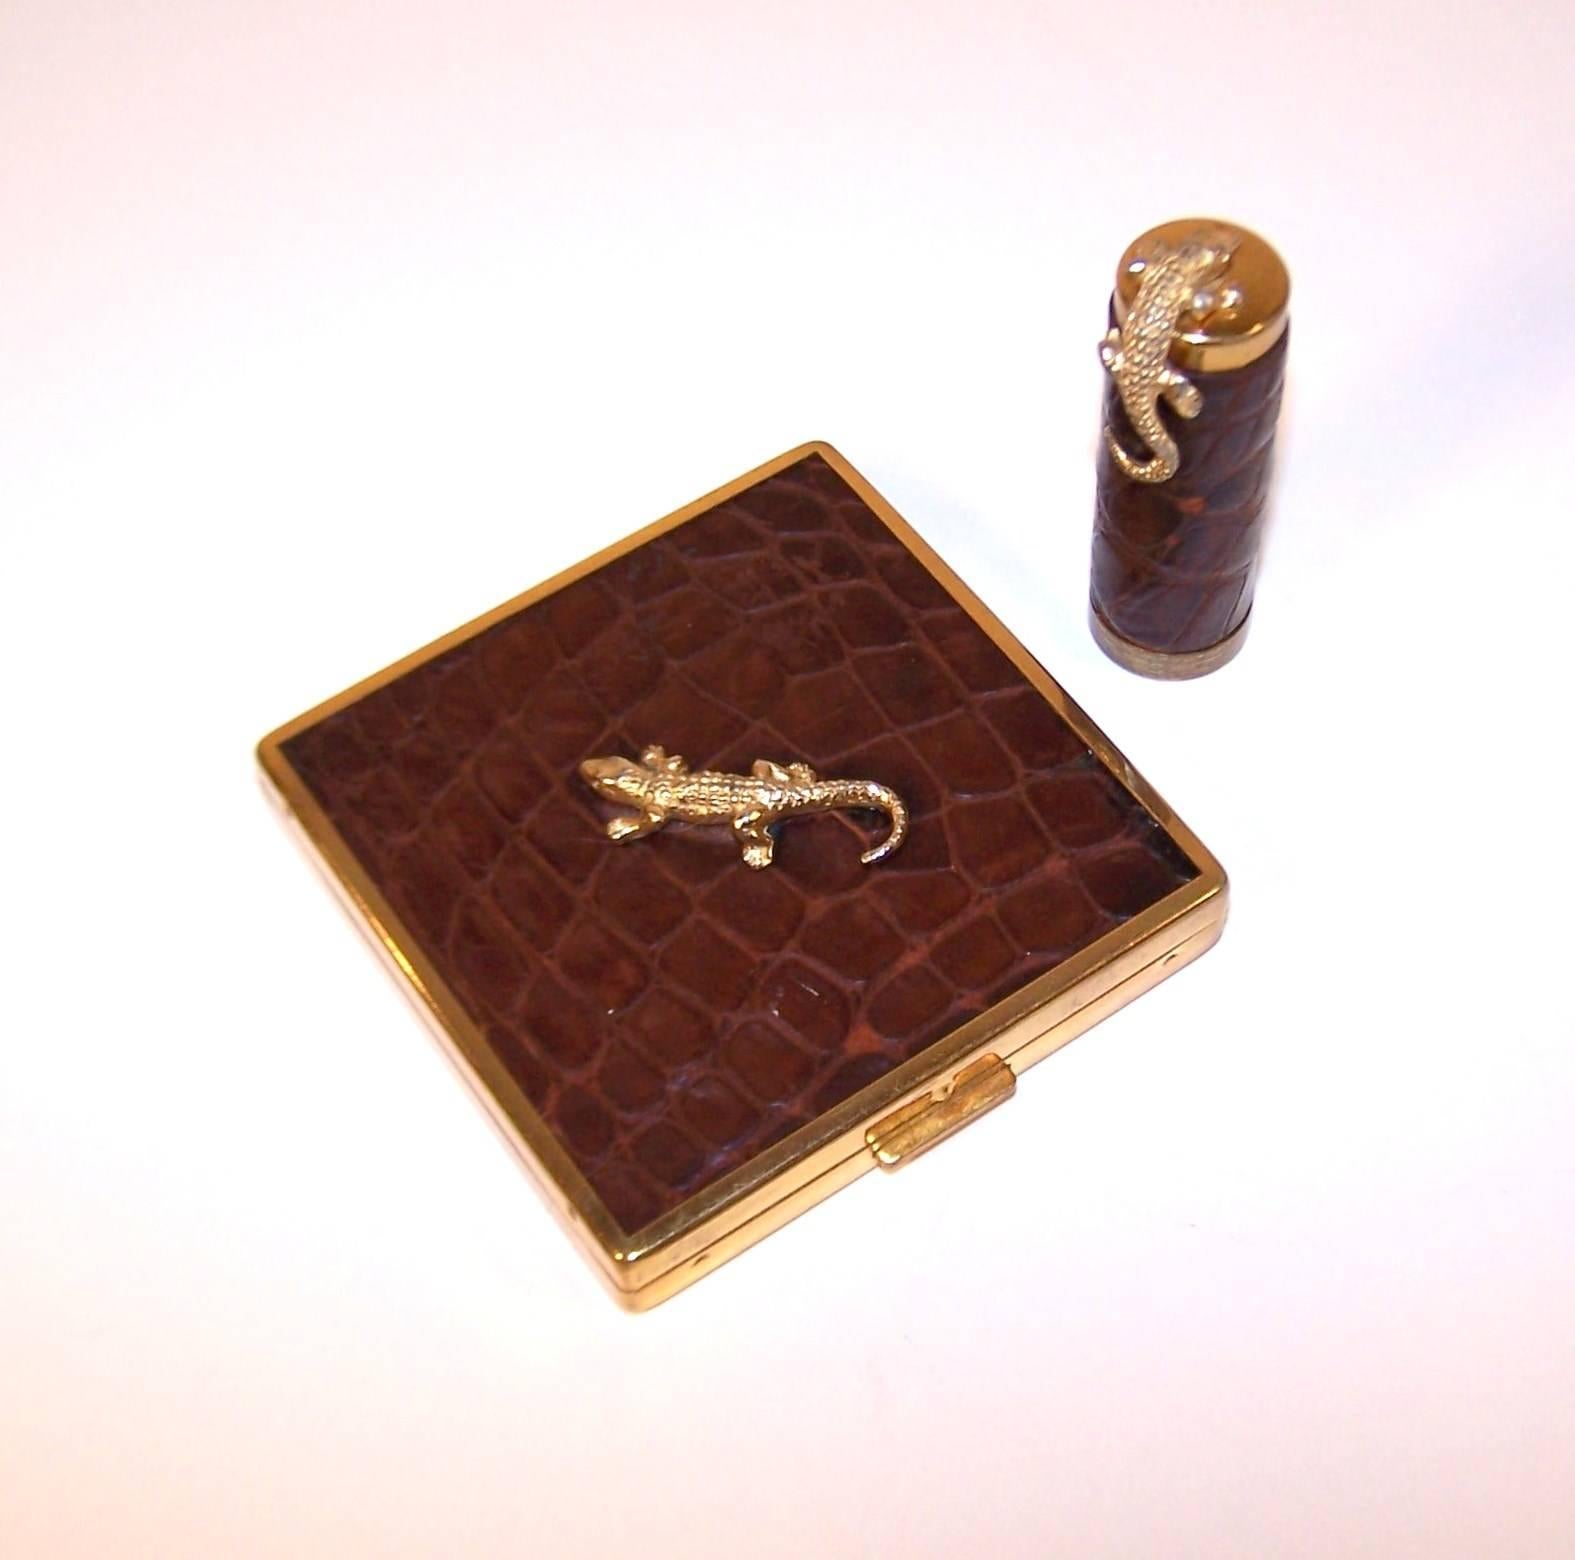 This whimsical 1950's alligator adorned set is by Ciner, an American costume jewelry company that has produced high quality accessories since the 1930's.  Both the gold tone mirrored compact and matching lipstick are covered in embossed brown